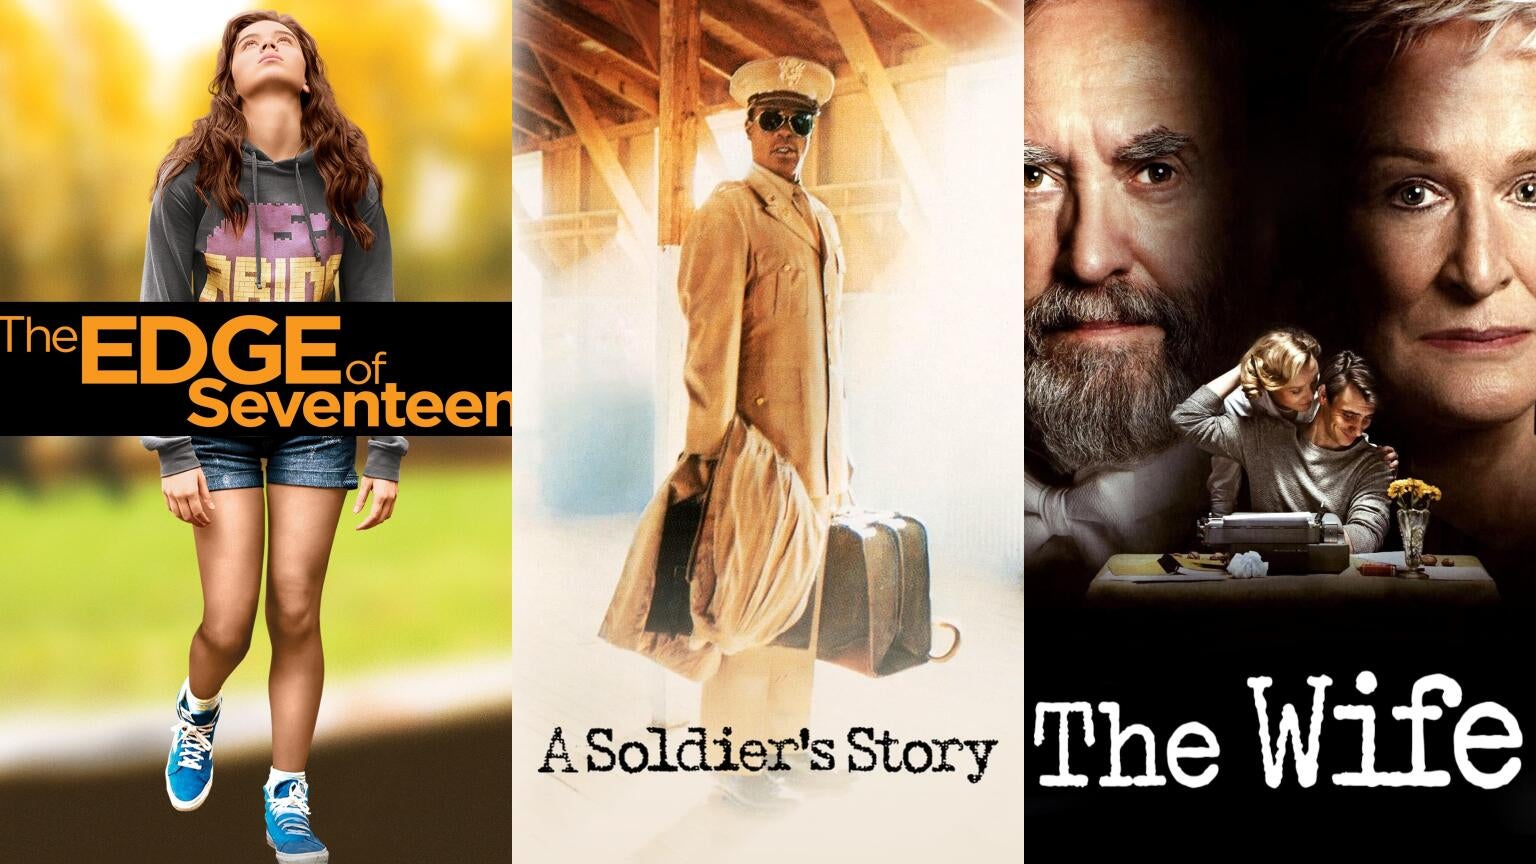 Movie posters for "The Edge of Seventeen," "A Soldier's Story," and "The Wife"